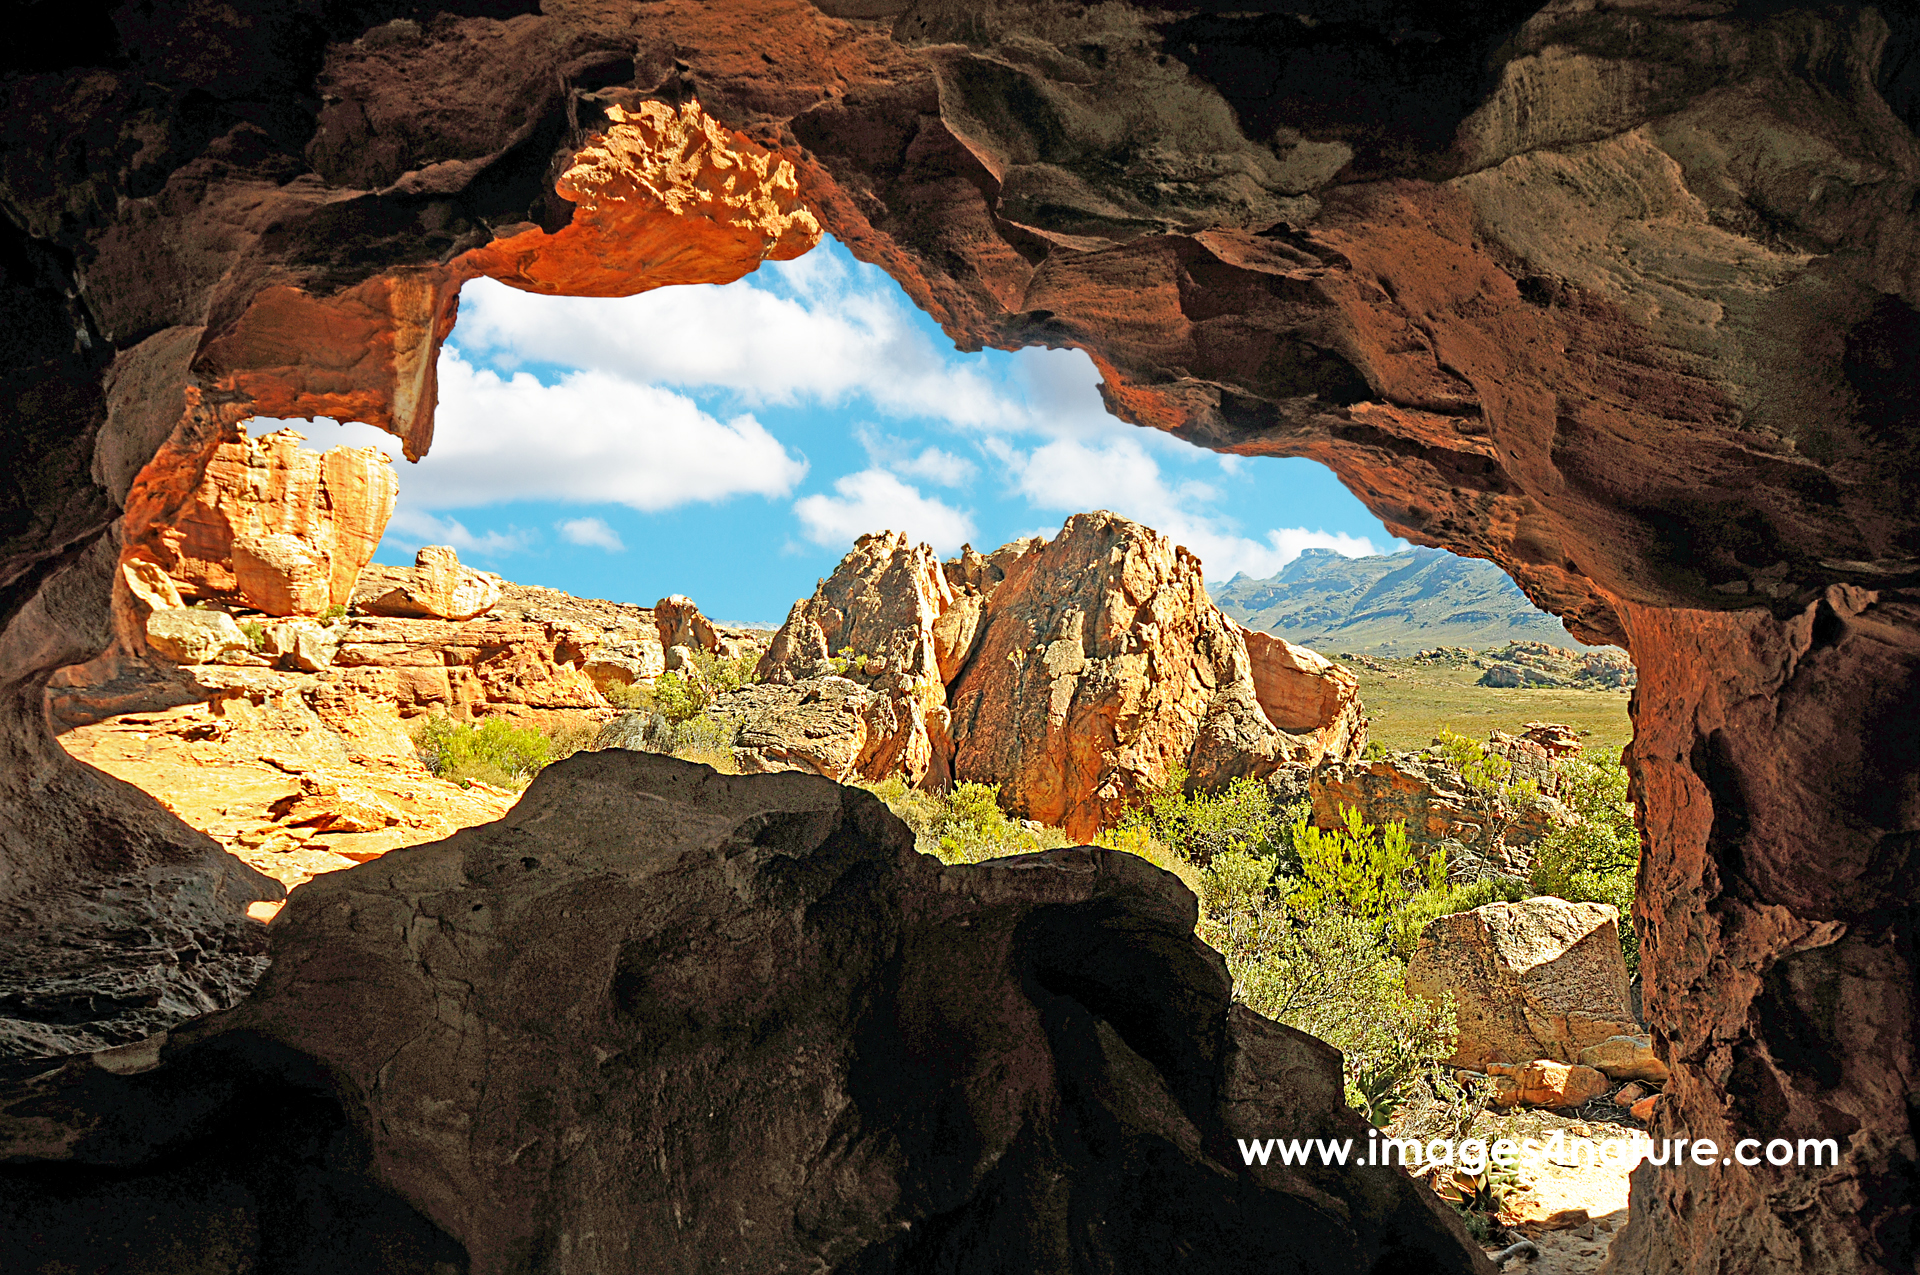 View from a sandstone cave on a beautiful landscape against sky